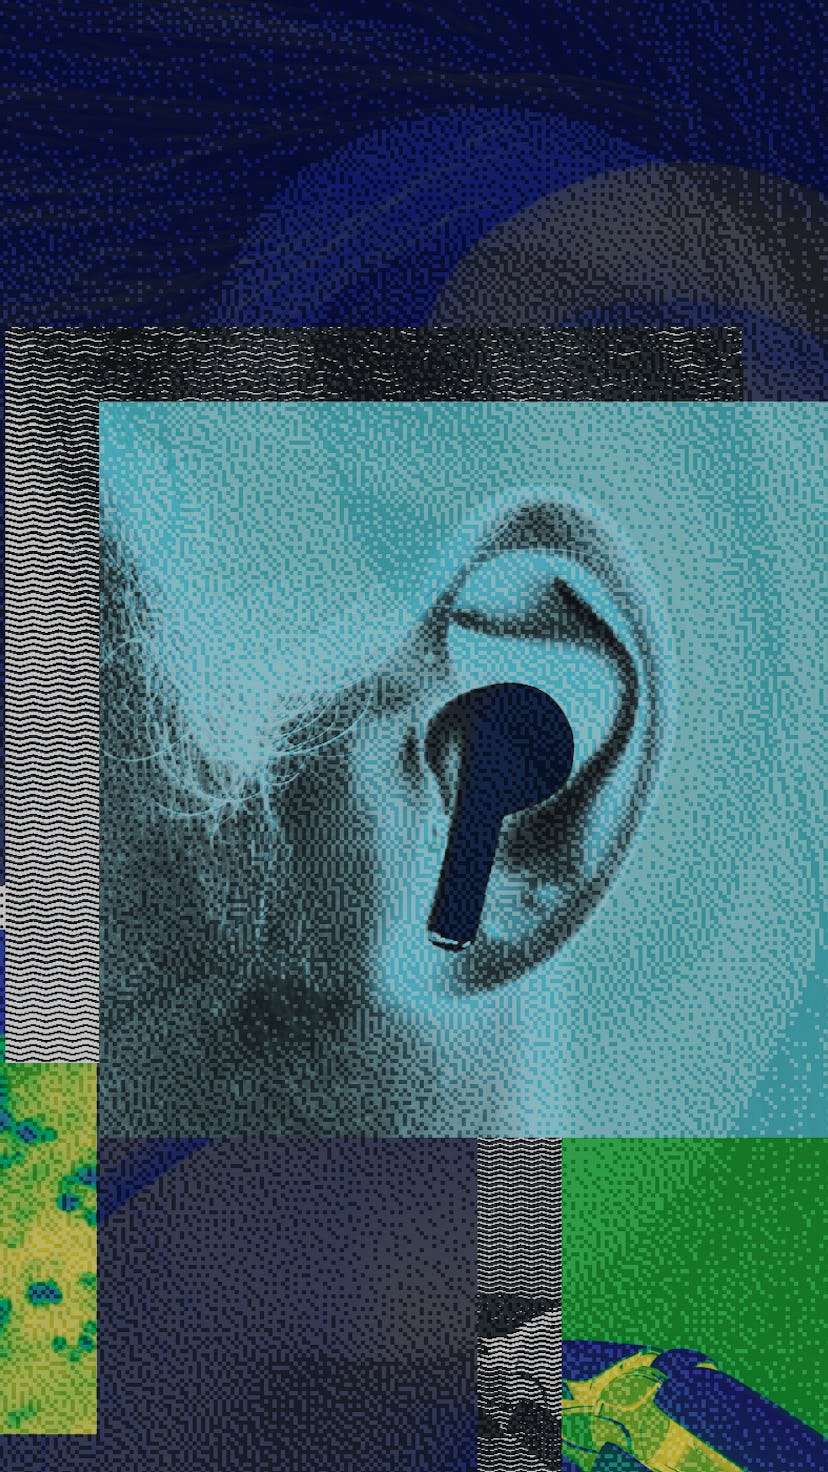 ear buds and audio conceptual illustration